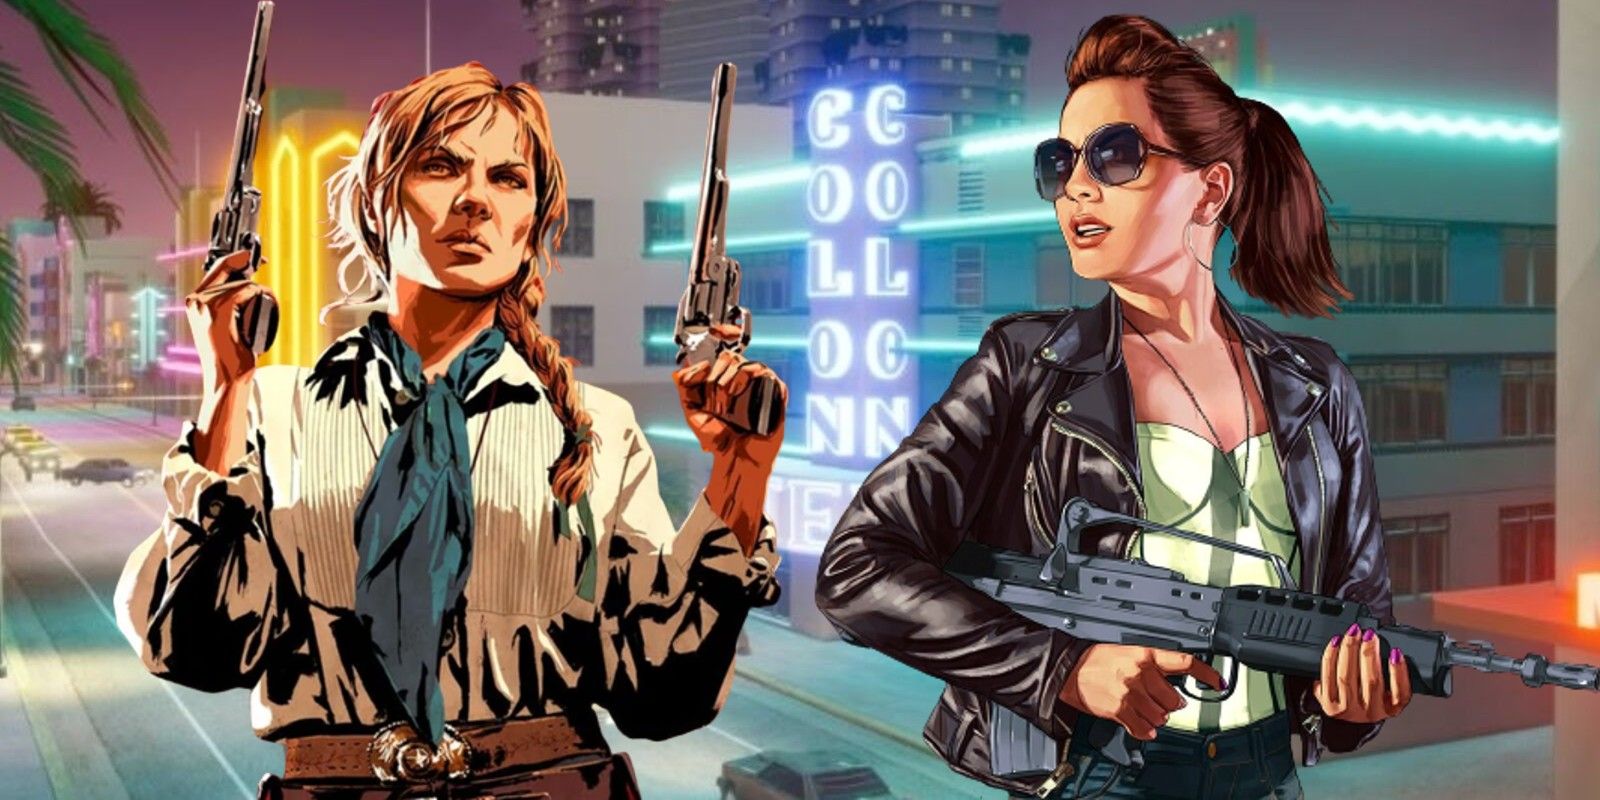 Sadie Adler from Red Dead Redemption 2 and a female GTA Online promotional character in Vice City.